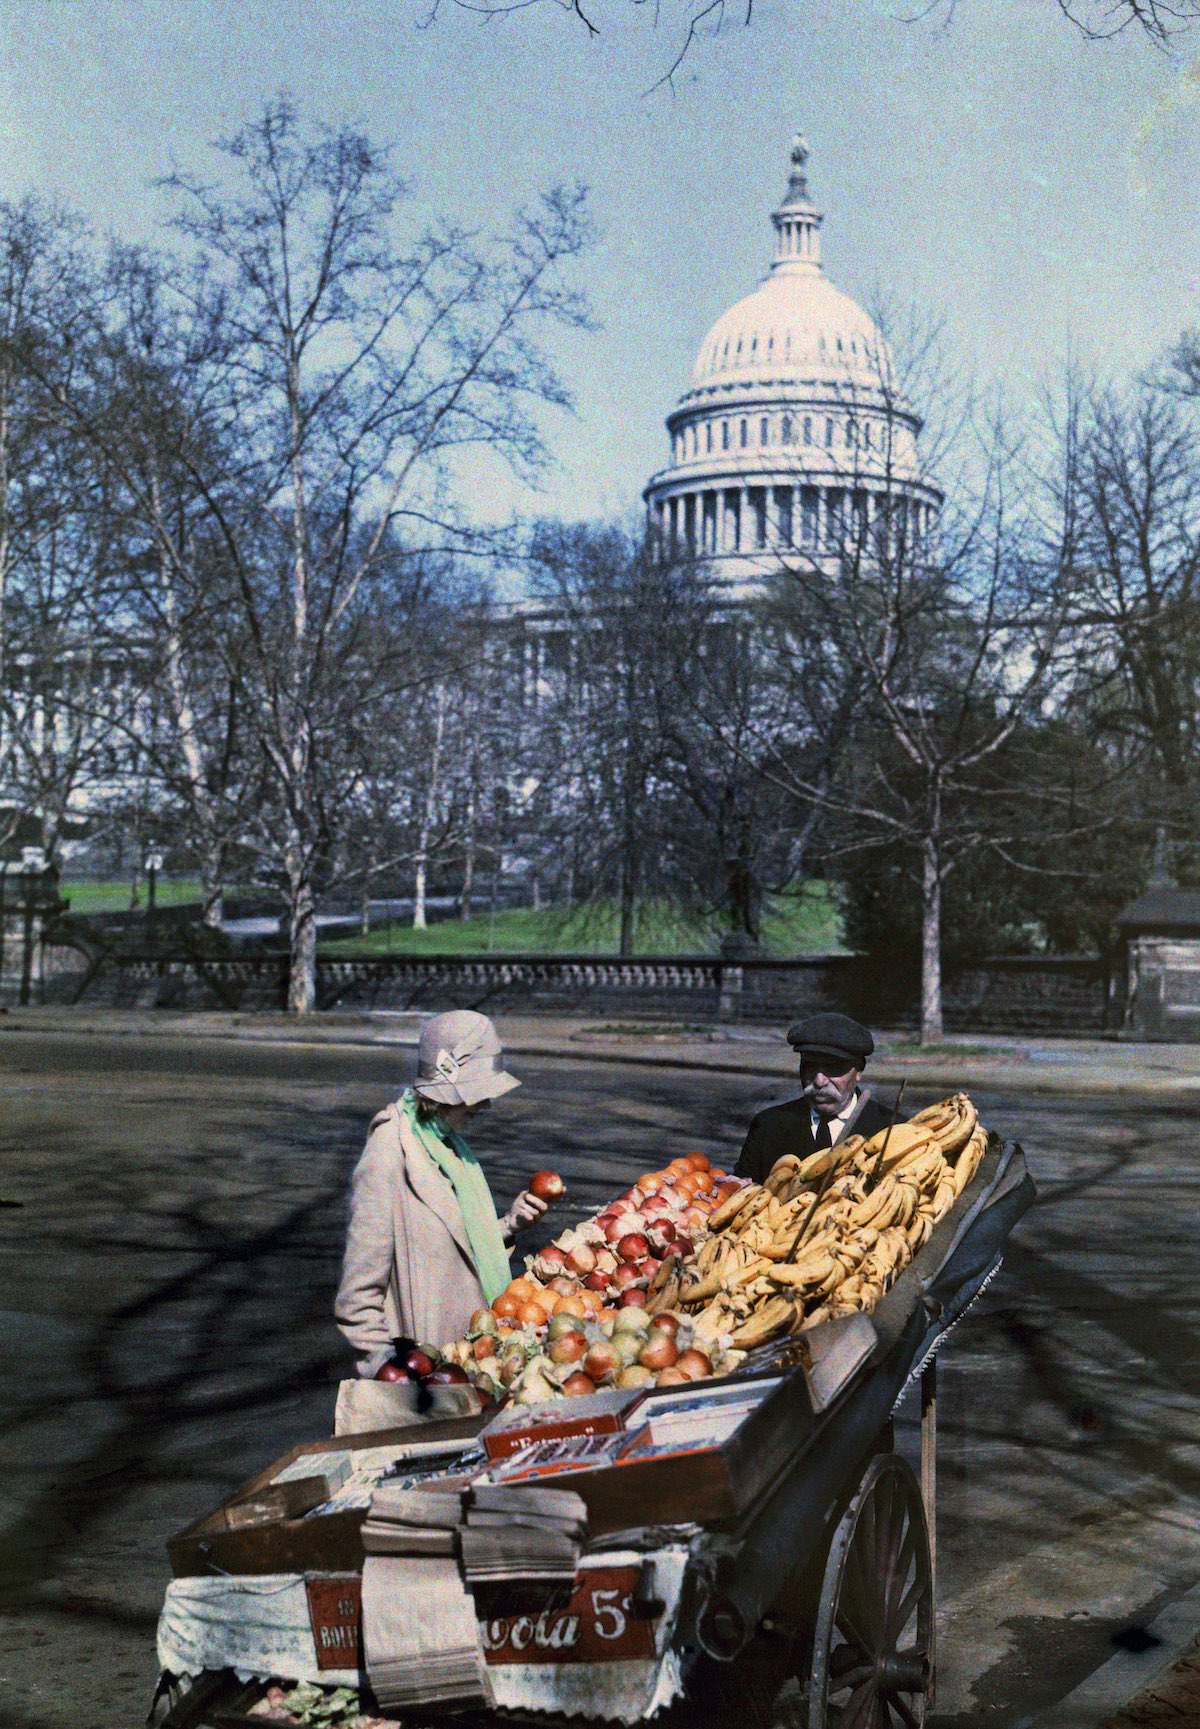 A woman in front of a fruit rack in the US capital. Washington, DC.